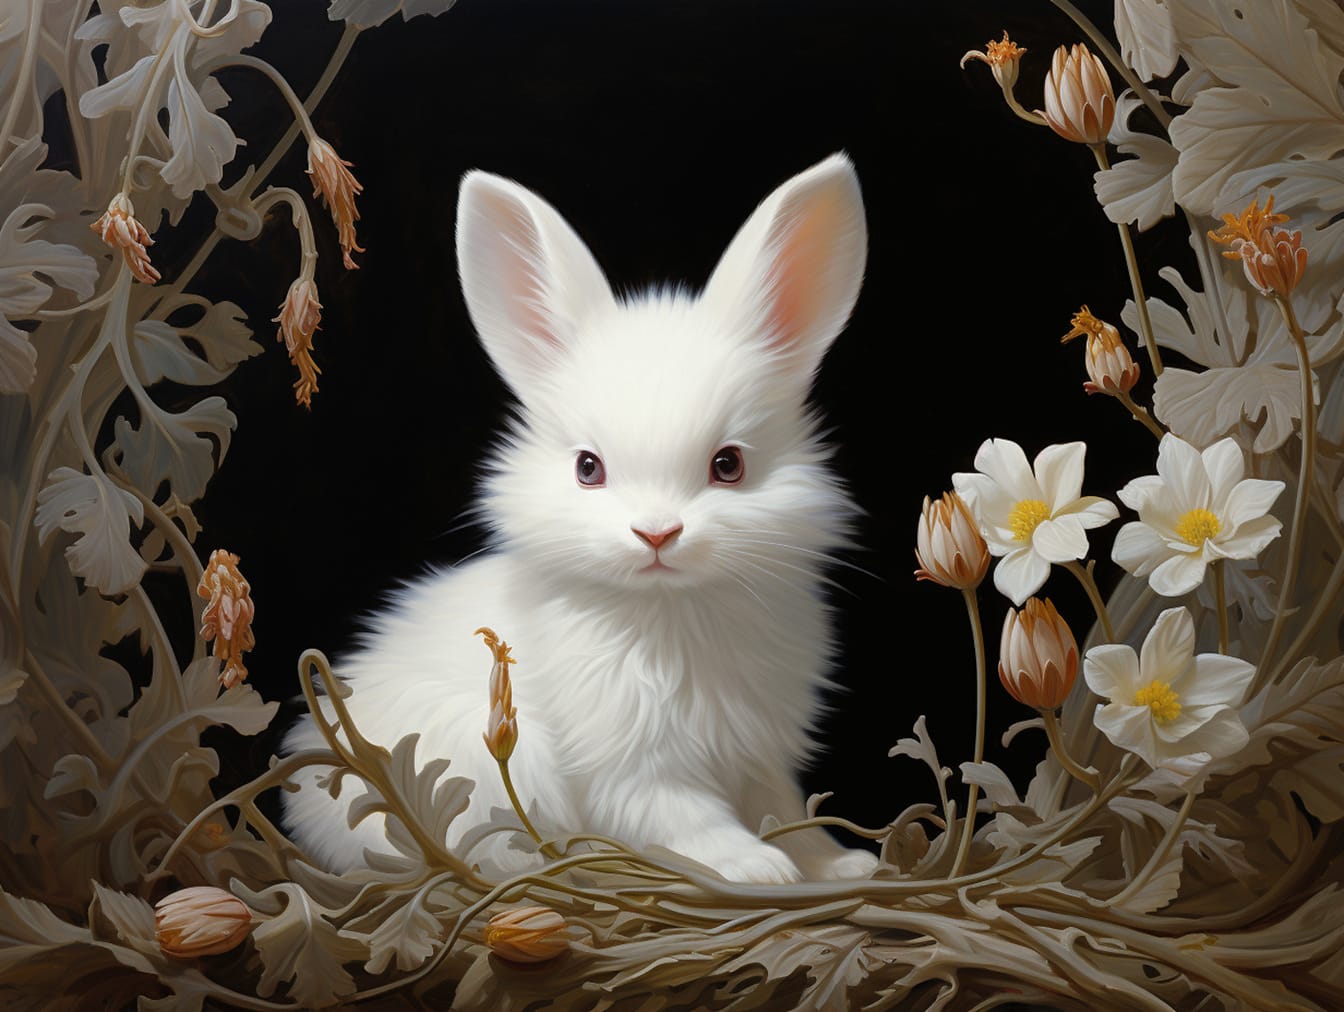 Furry curly white bunny Easter illustration